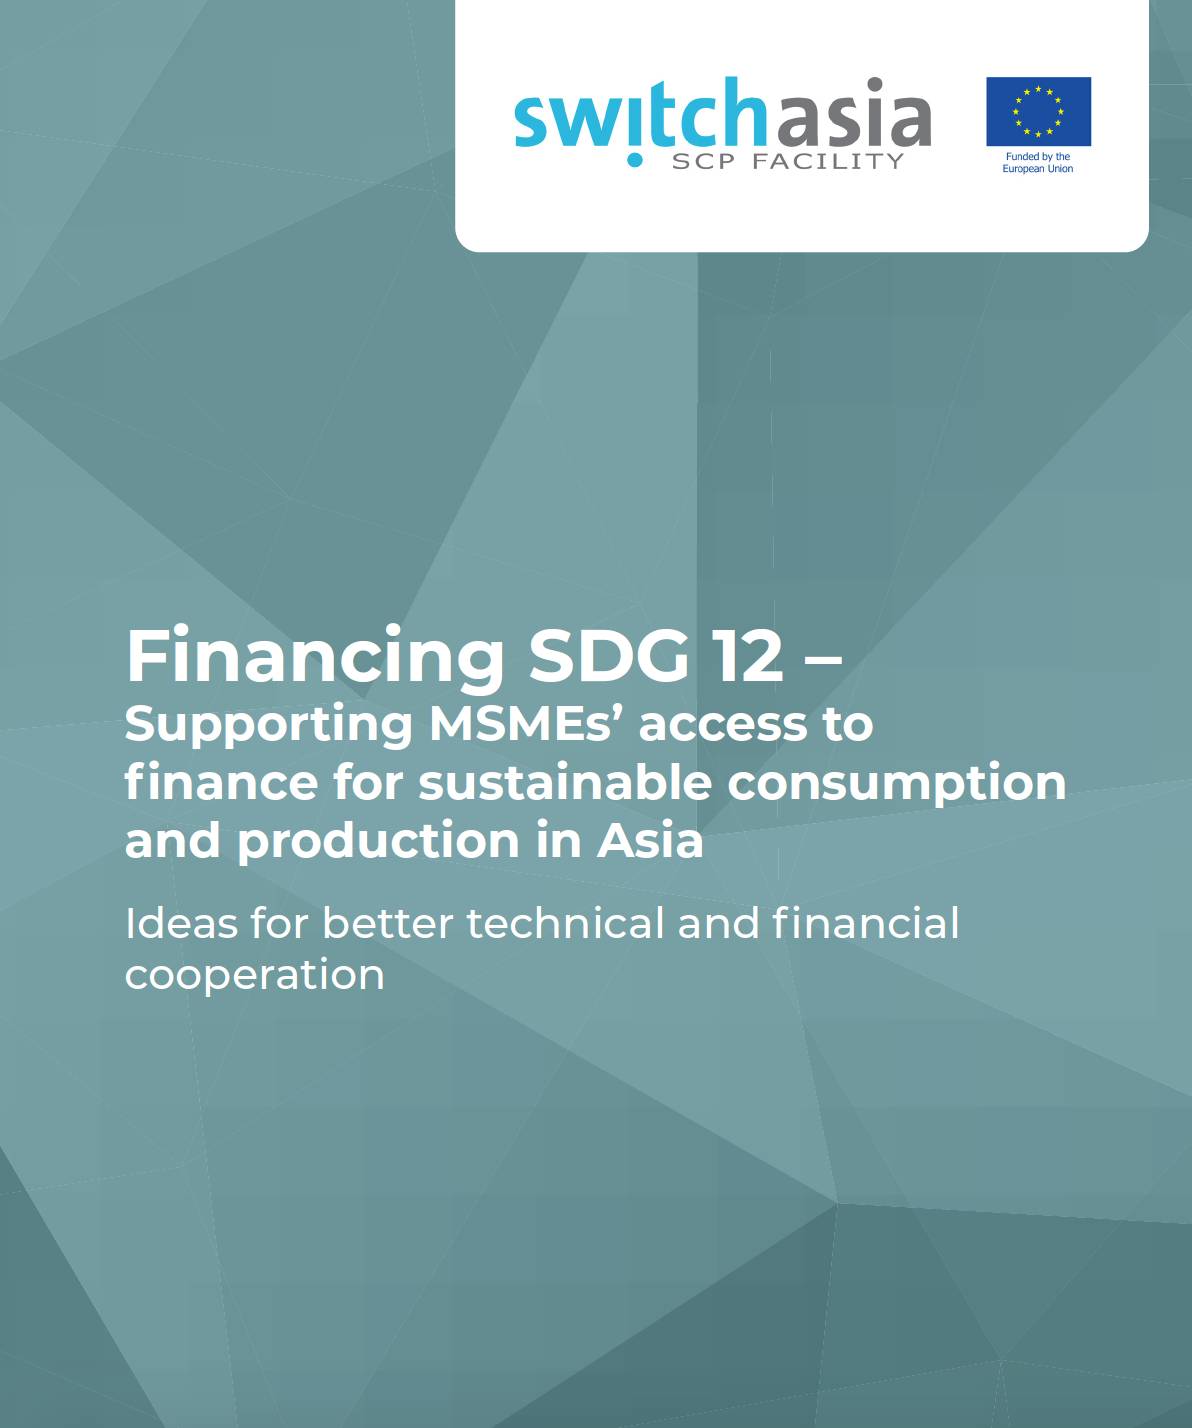 Financing SDG 12 - Supporting MSMEs' access to finance for sustainable consumption and production in Asia